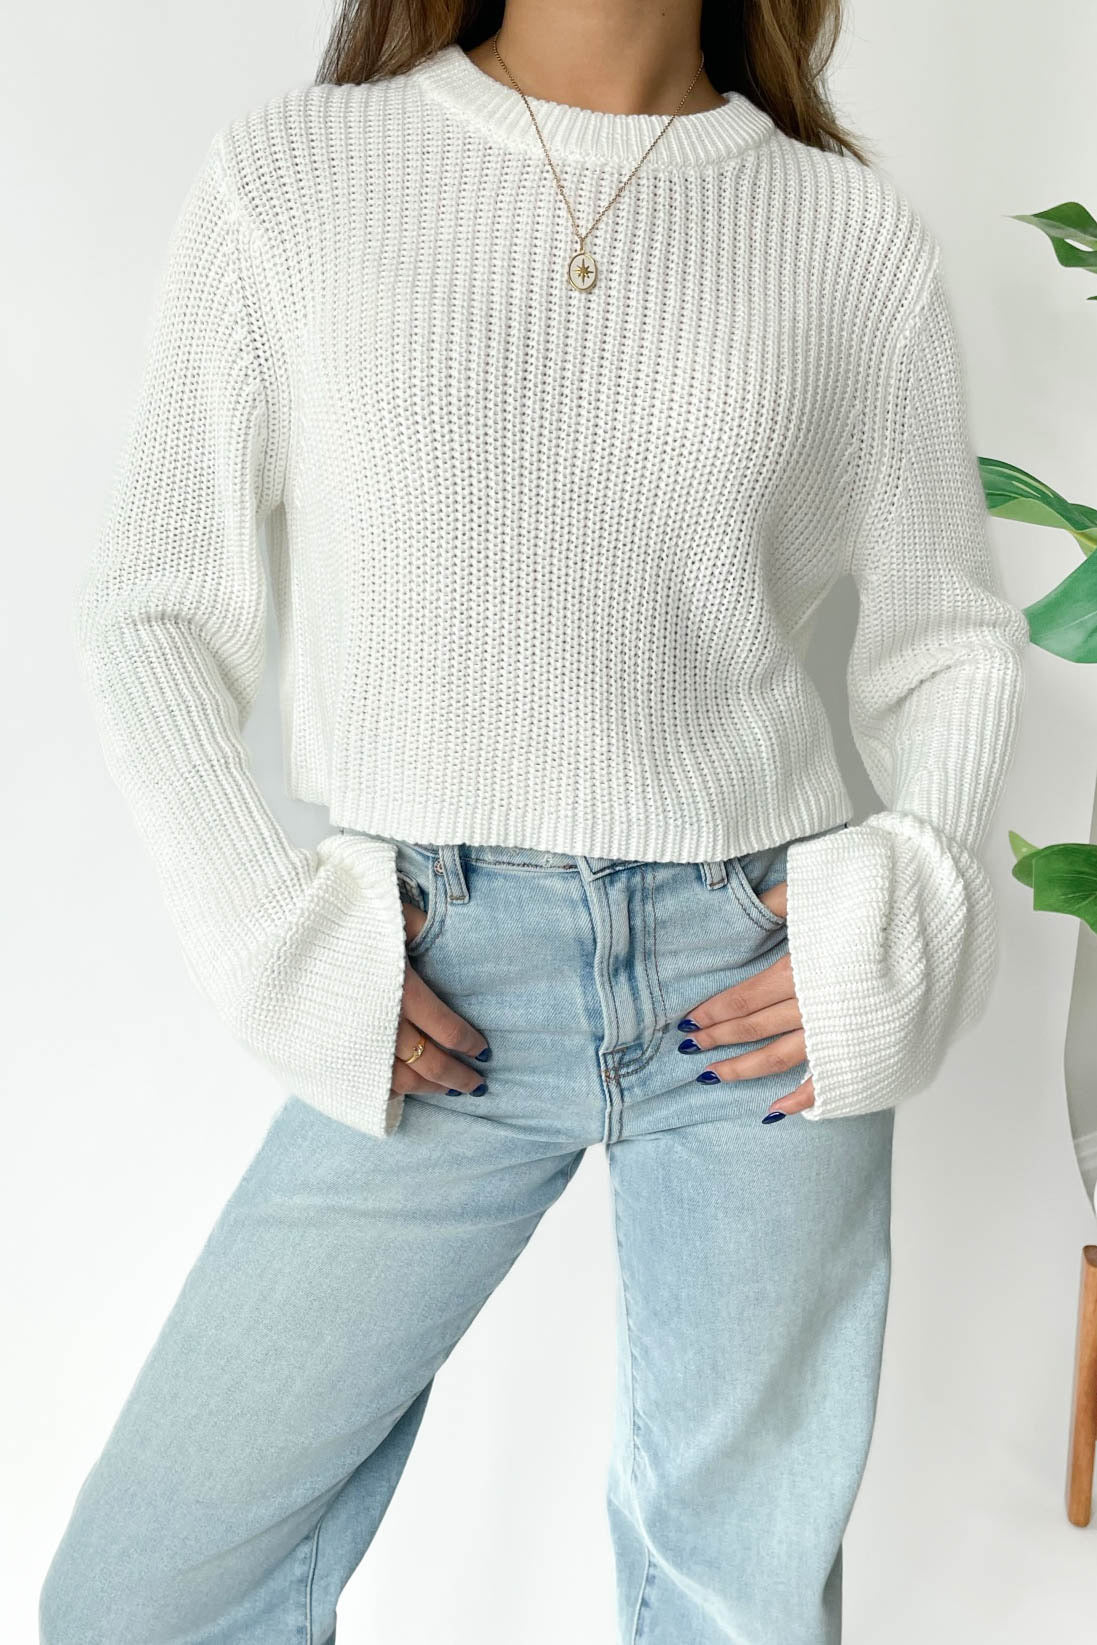 Act Natural Sweater in White